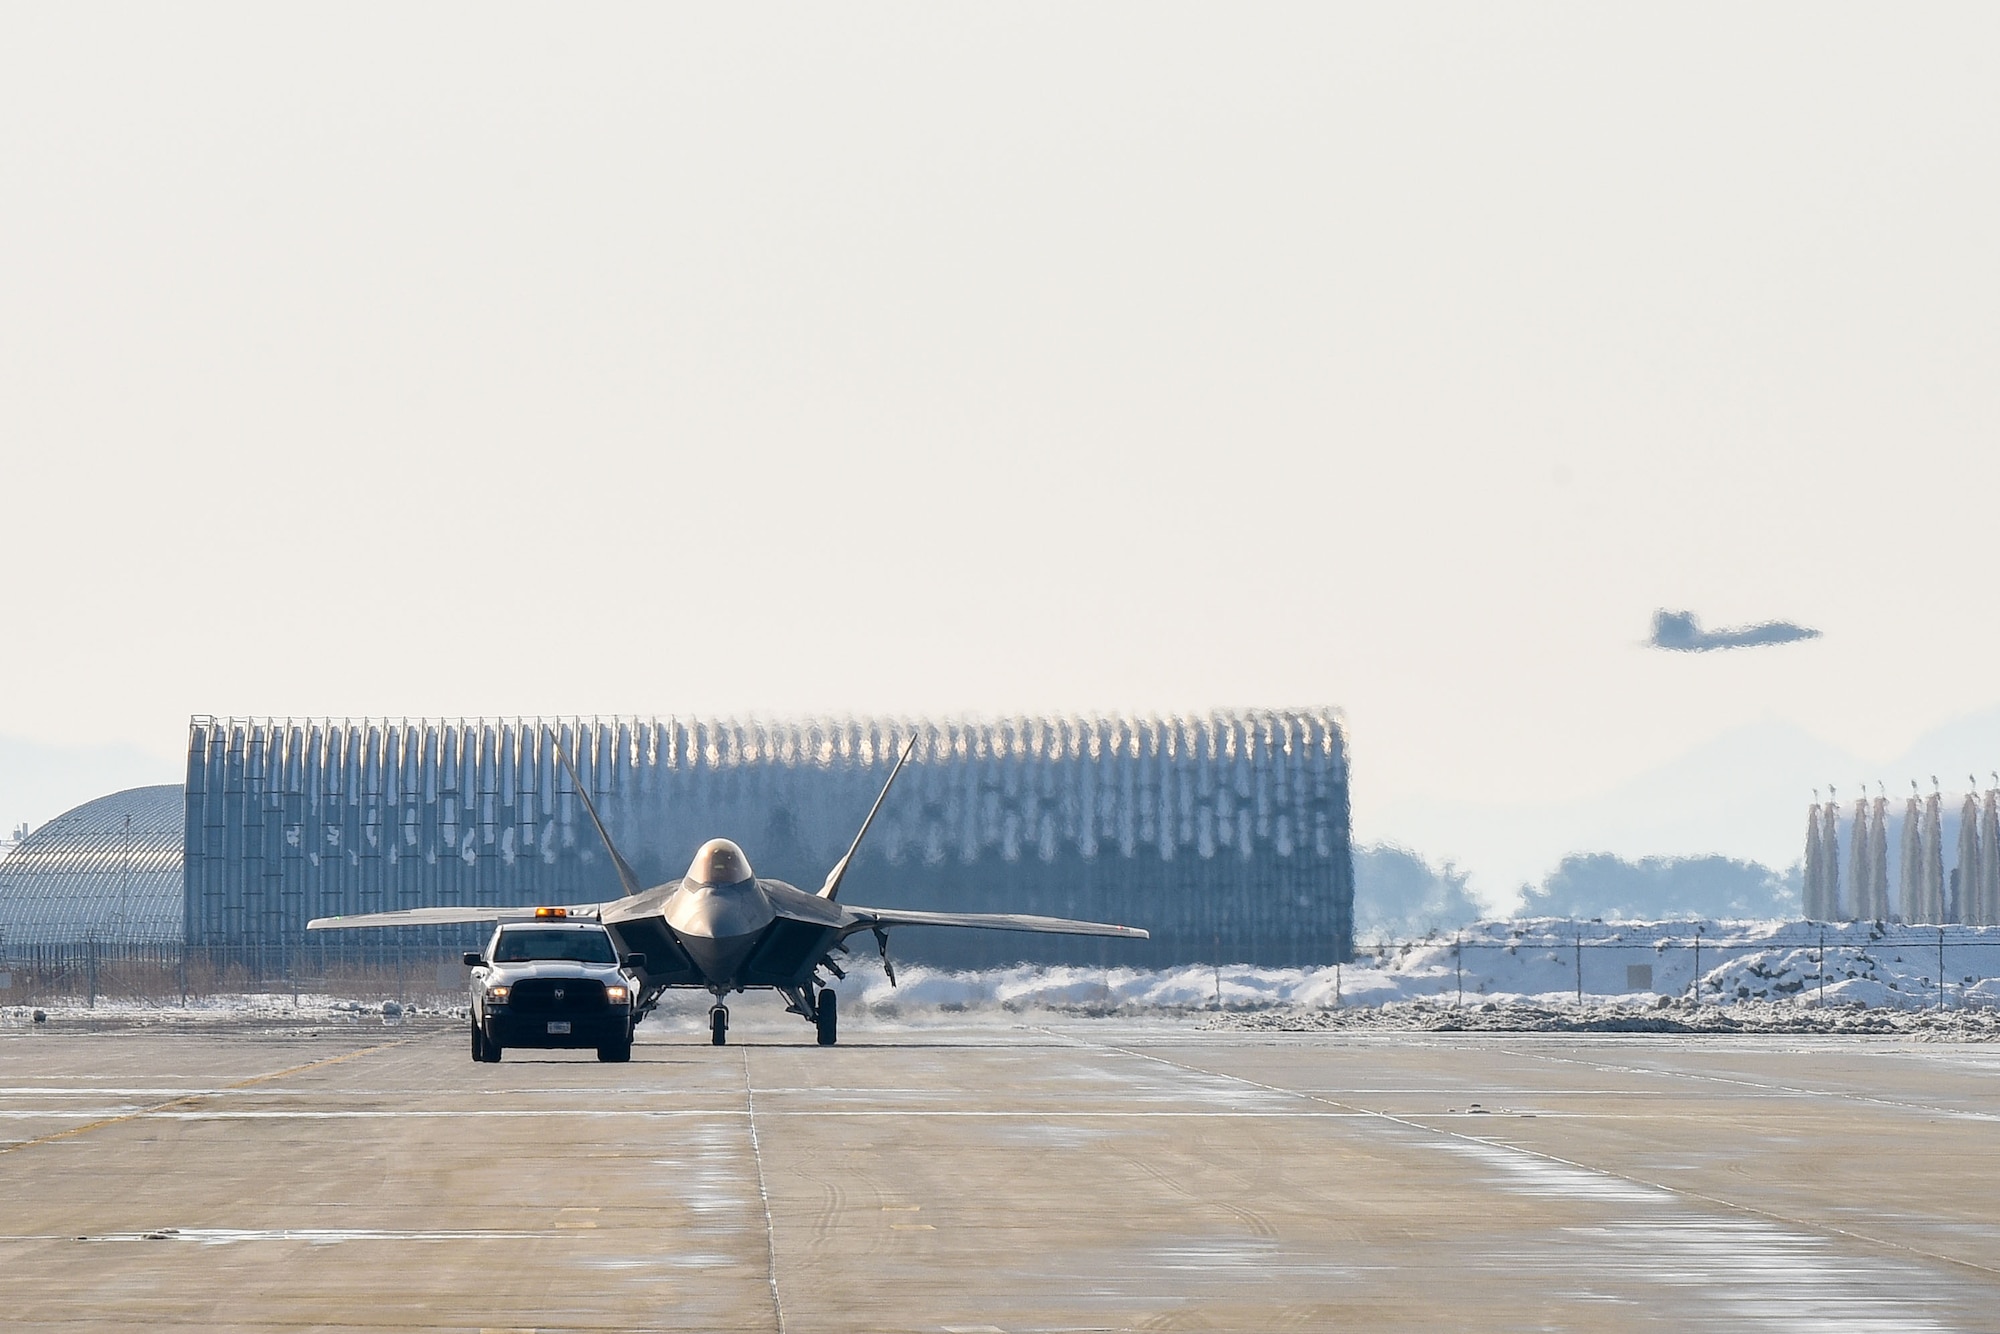 An F-22 Raptor assigned to 525th Fighter Squadron, Joint Base Elmendorf-Richardson, Alaska, taxis on the runway at Kunsan Air Base, Republic of Korea, Dec. 20, 2022, prior to returning to U.S. Marine Corps Station Iwakuni, Japan. The aircraft was taking part in the Iron Shadow joint training event, designed to enhance joint and bilateral interoperability between U.S. Air Force and ROK Air Force assets. Training among multiple-generation aircraft ensures combat readiness in a dynamic environment and helps reassure the Republic of Korea of the United States’ continued commitment to ensuring a free and open Indo-Pacific. (U.S. Air Force photo by Tech. Sgt. Timothy Dischinat)